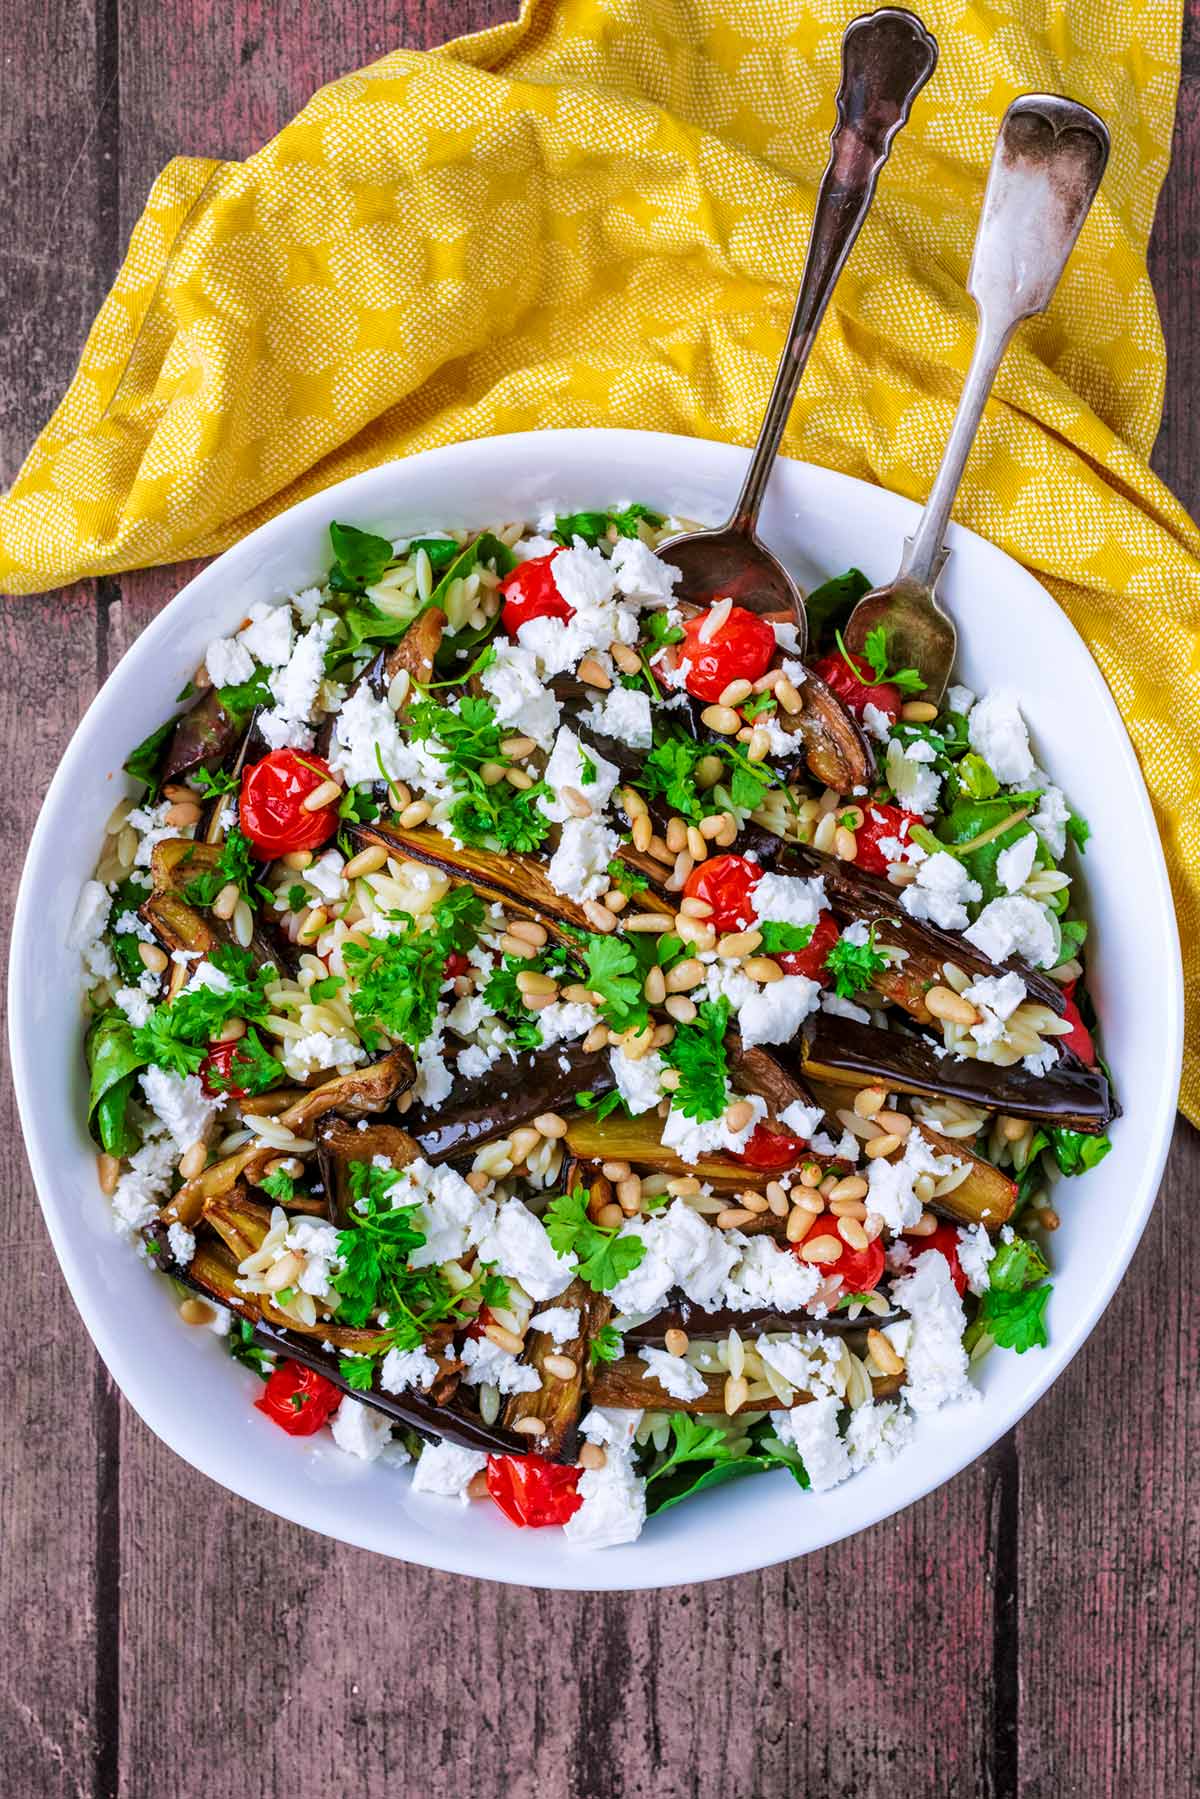 A bowl of salad topped with aubergines, tomatoes and crumbled feta cheese.